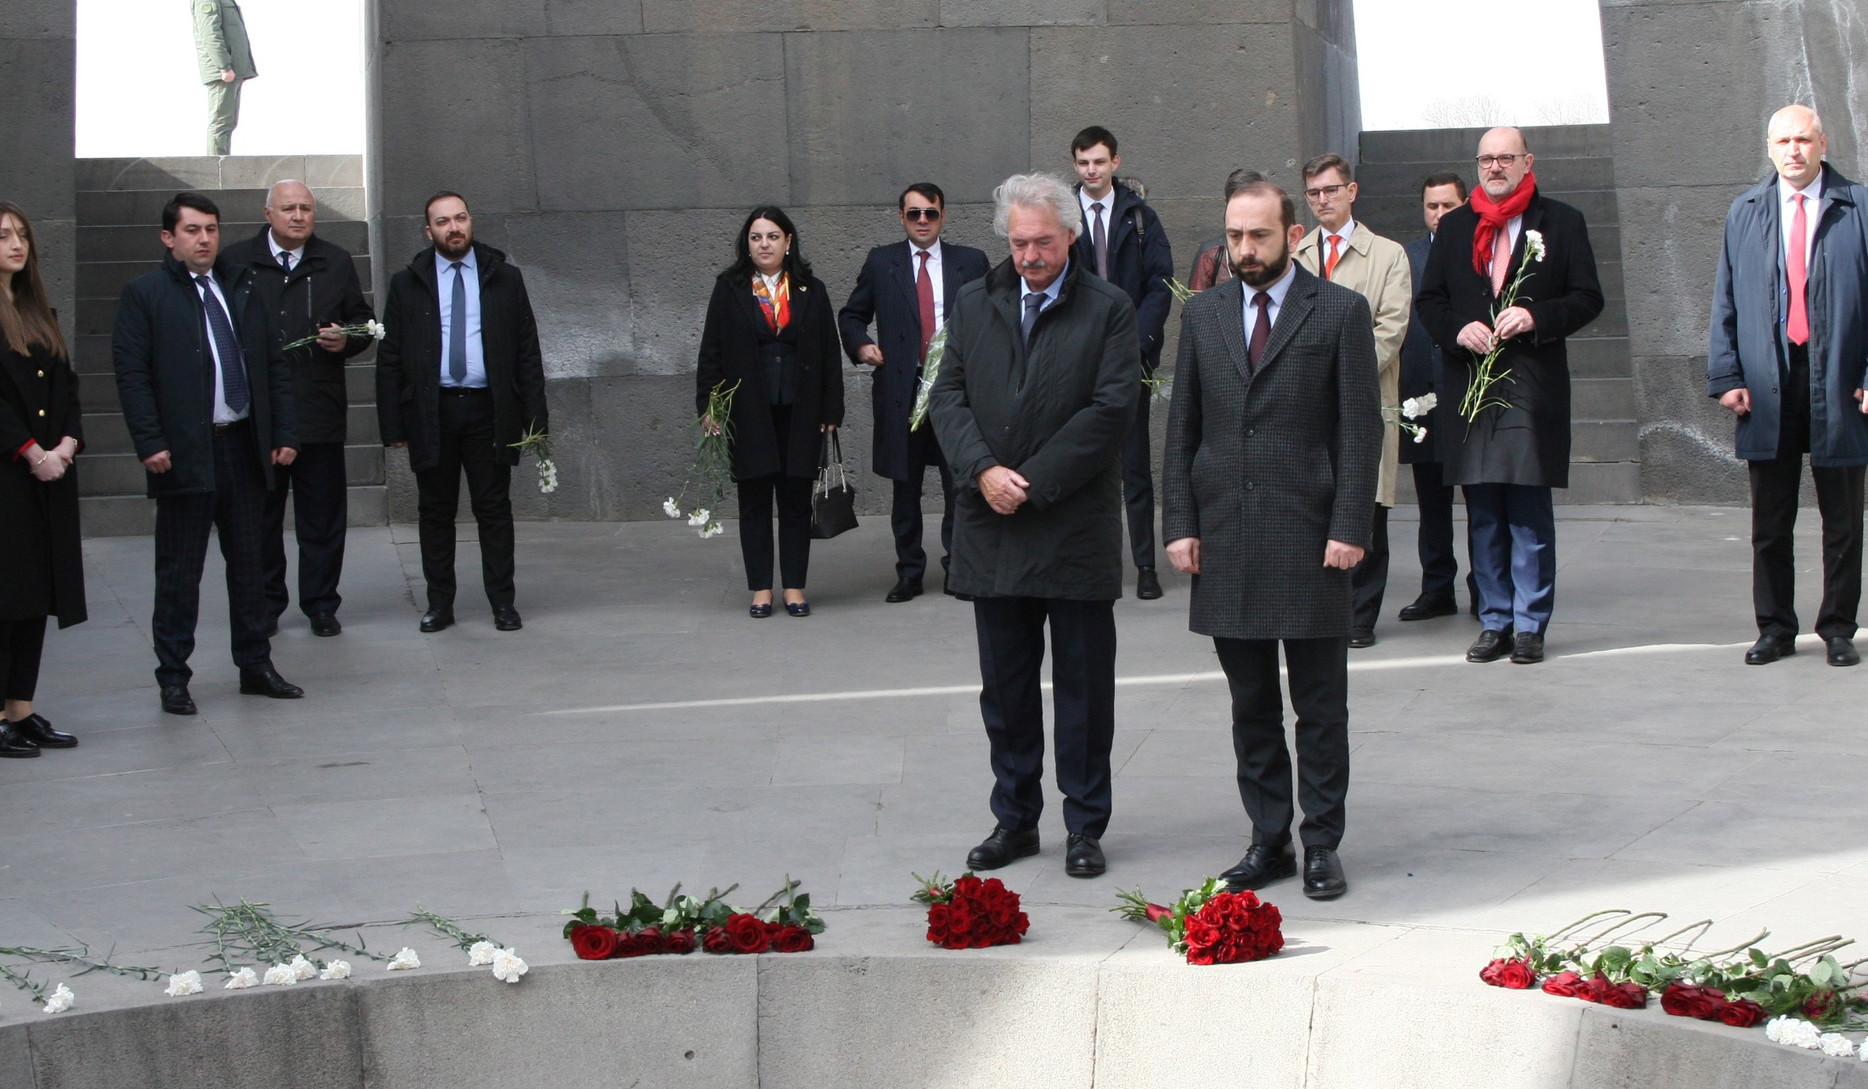 Foreign Ministers of Armenia and Luxembourg laid flowers in memory of victims of Armenian Genocide